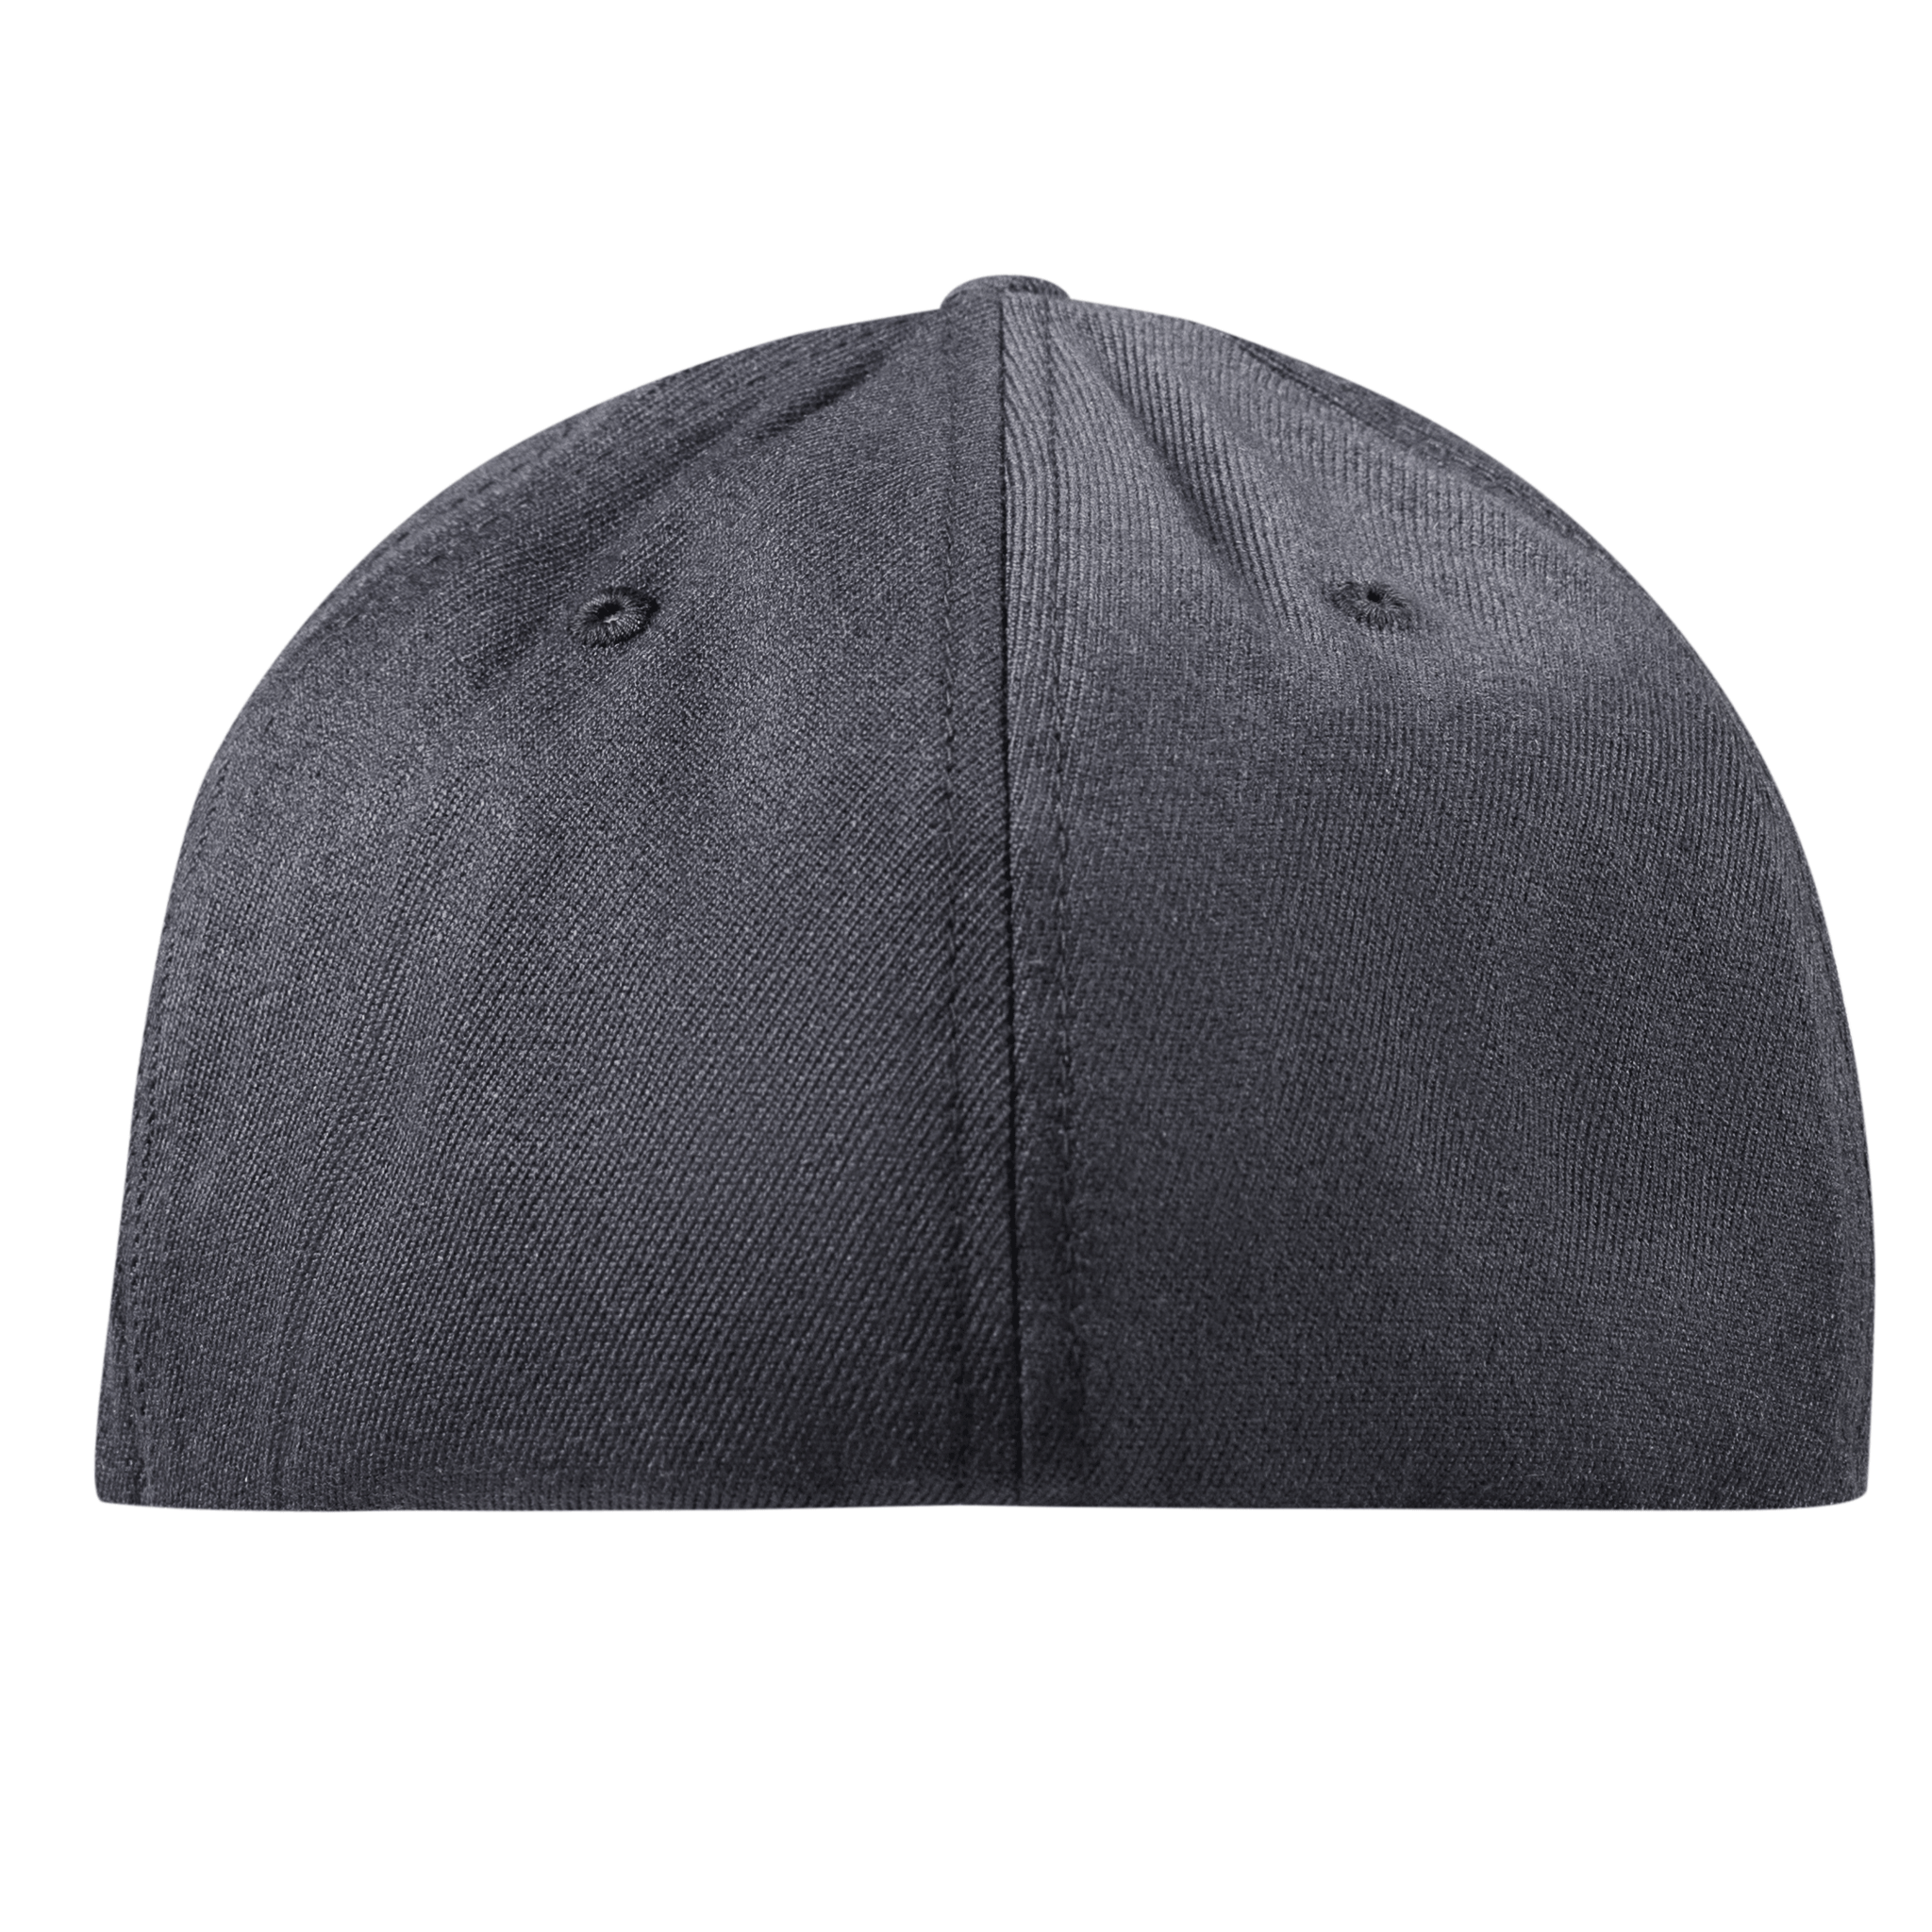 Michigan Turquoise Flexfit Fitted Back Charcoal